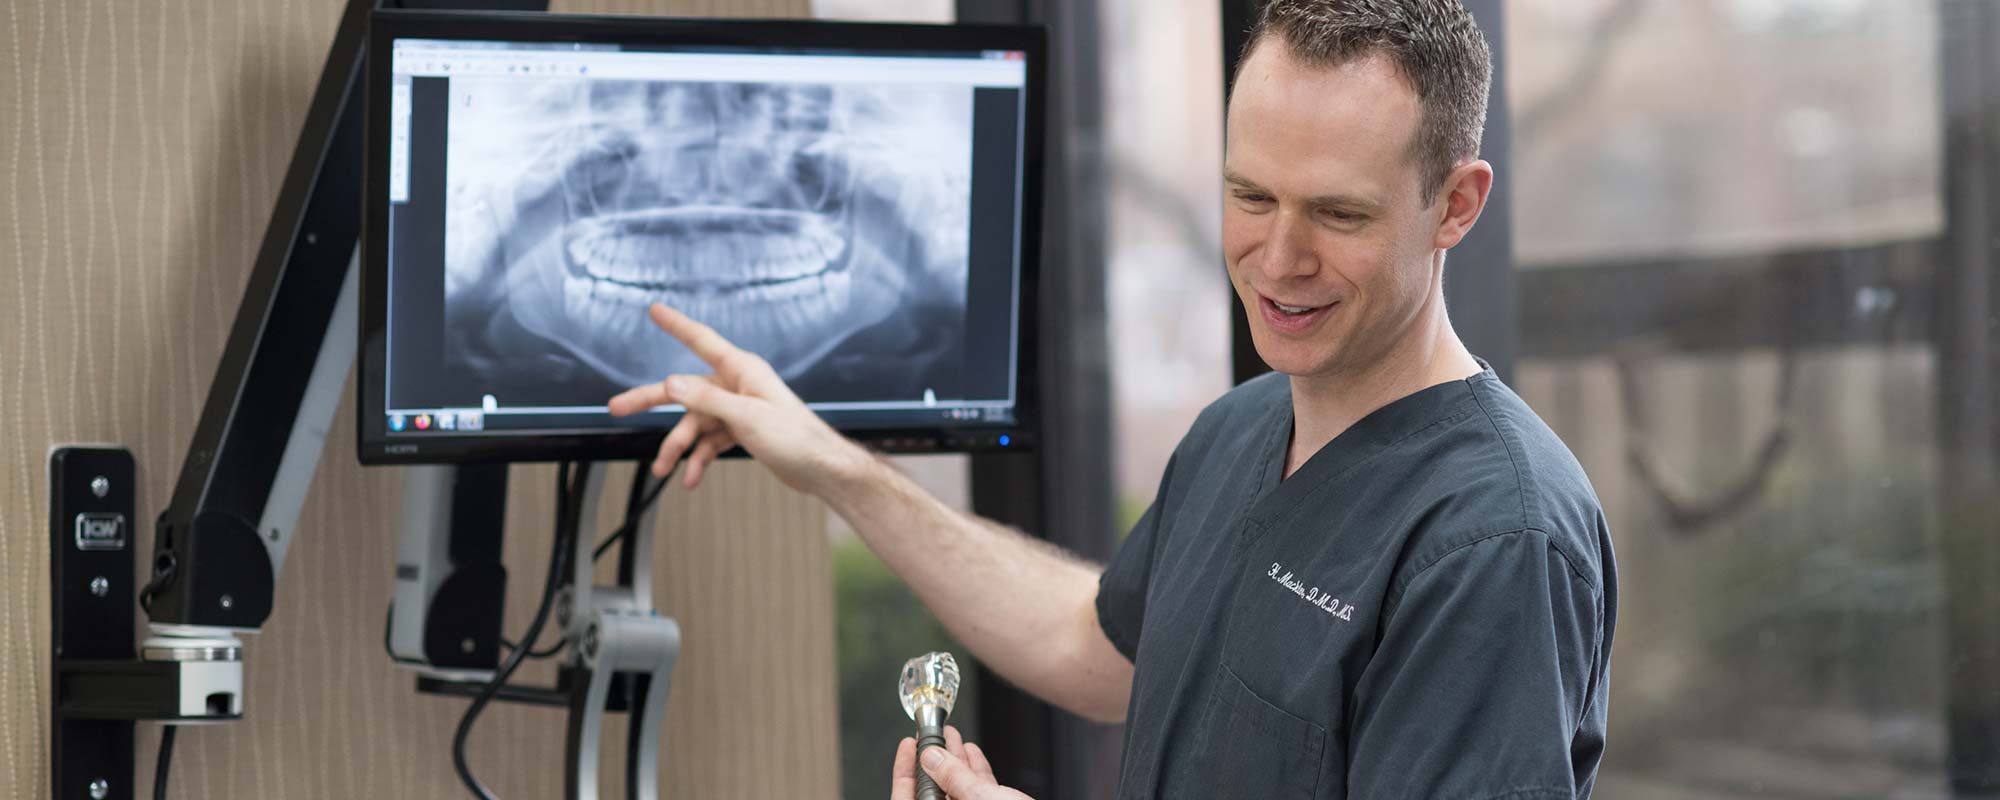 Park Dental Specialists offers TeethXpress dental implant services at our Lincoln Park and Orland Park dental clinics.